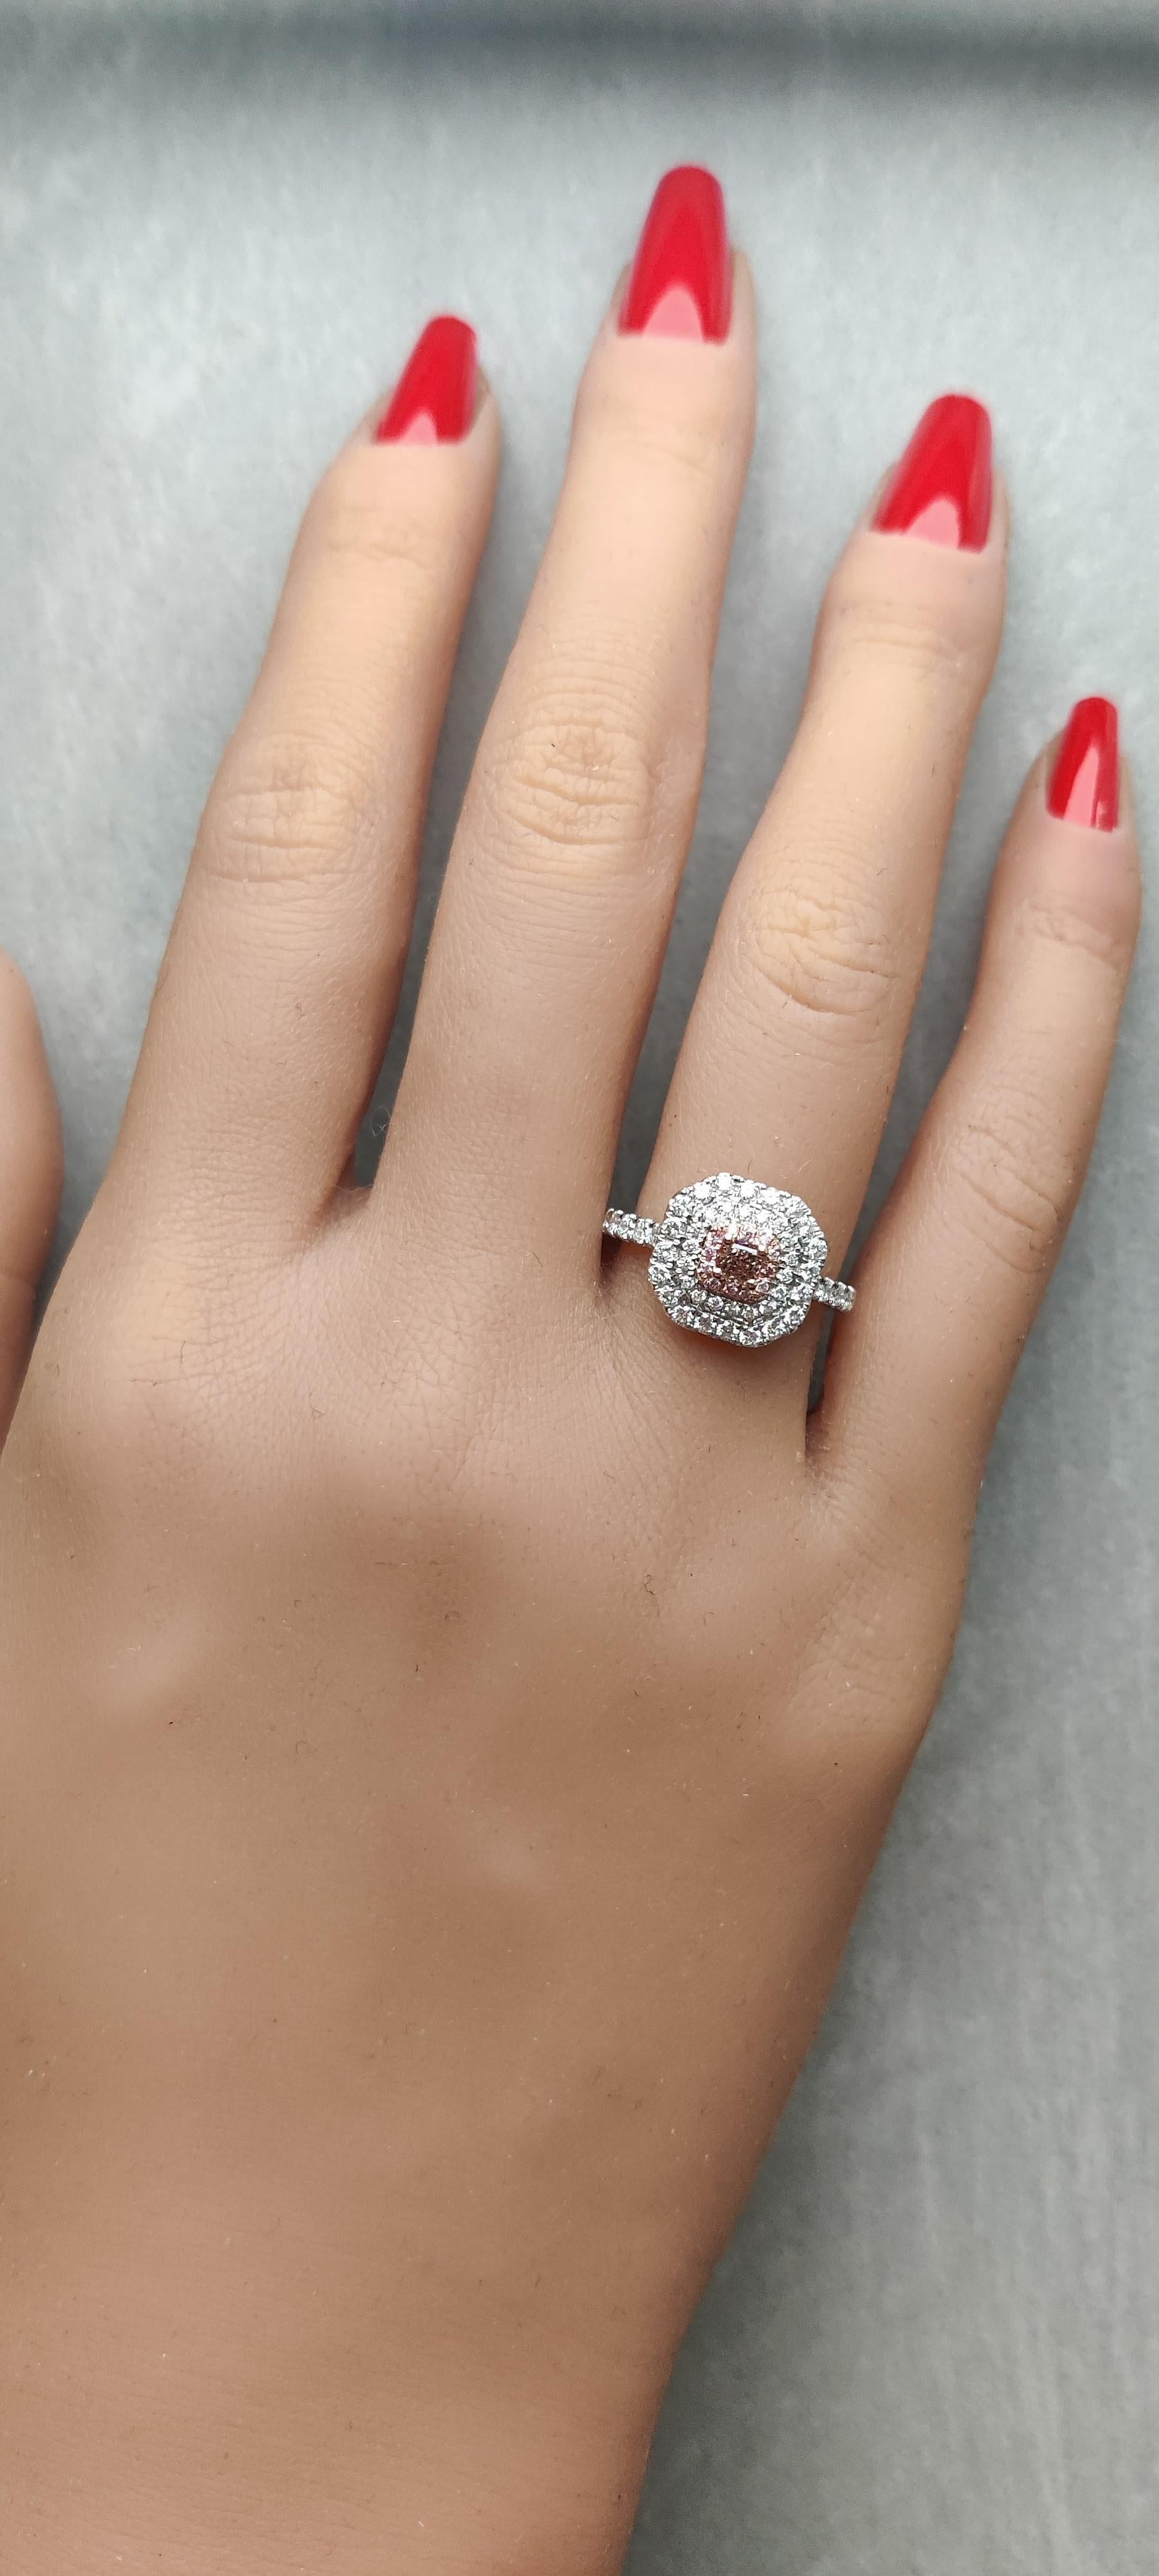 RareGemWorld's classic GIA certified diamond ring. Mounted in a beautiful 18K Rose and White Gold setting with a natural radiant cut brown diamond. The diamond has a pink look and is surrounded by round natural pink diamond melee and round natural